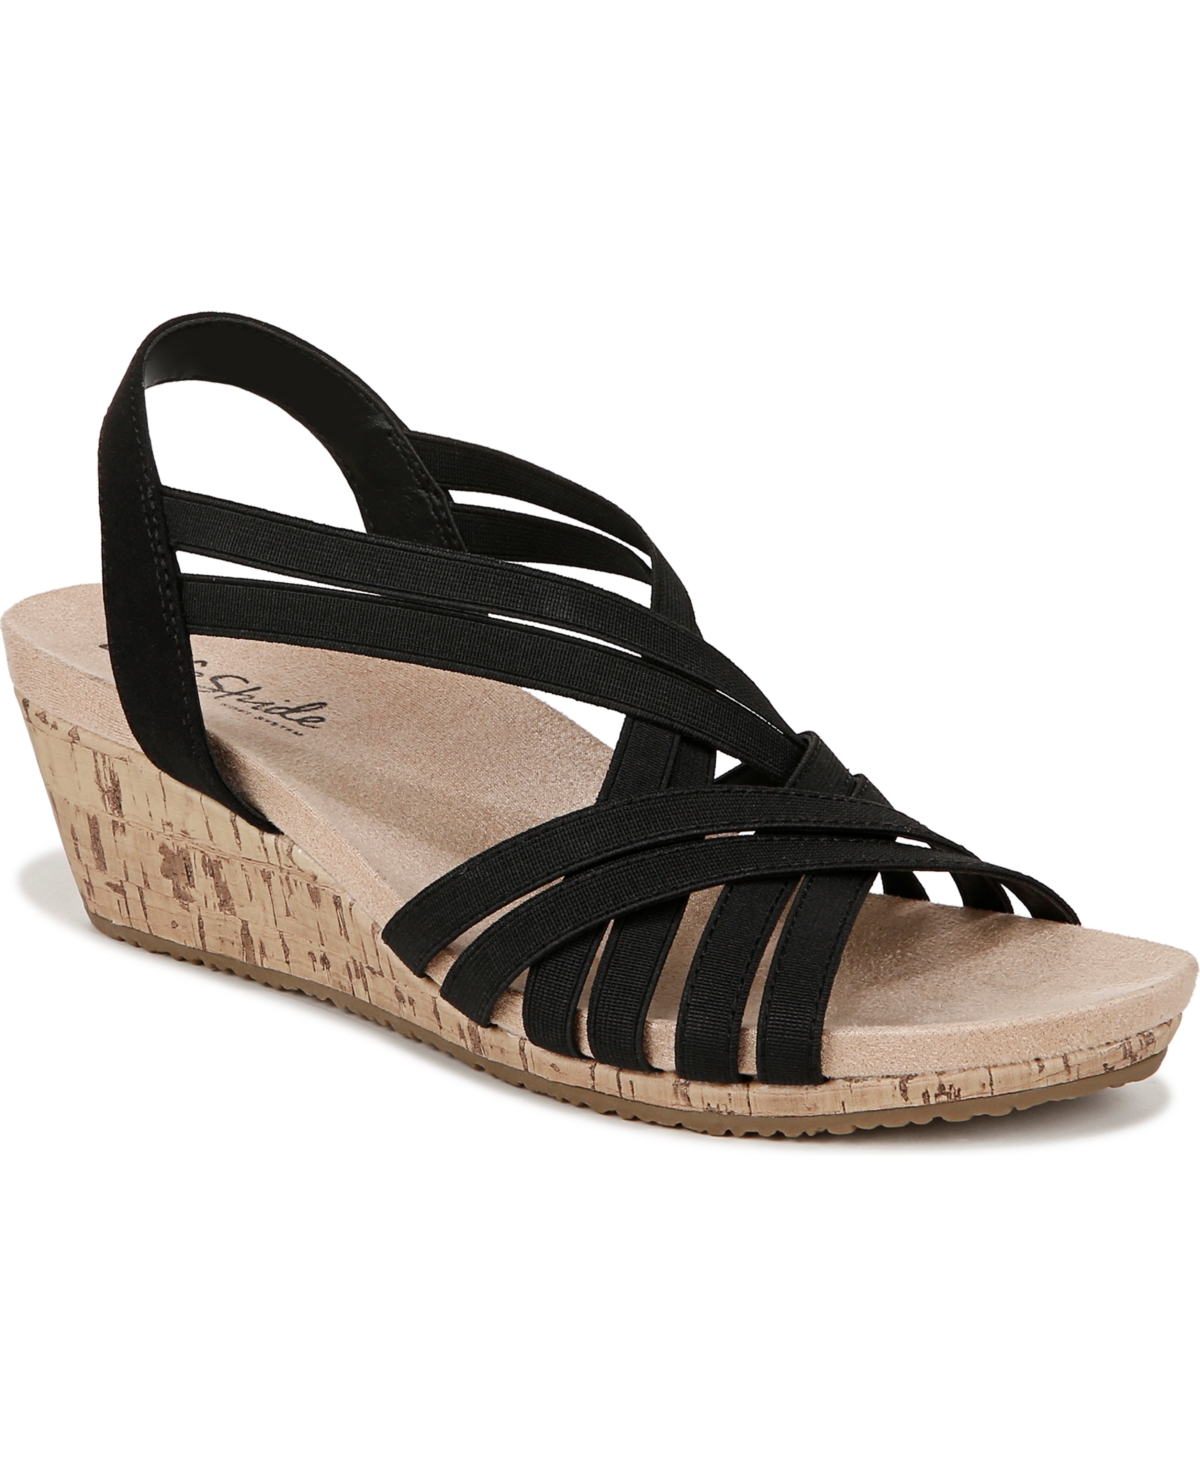 Women's Mallory Strappy Wedge Sandals - Black Fabric